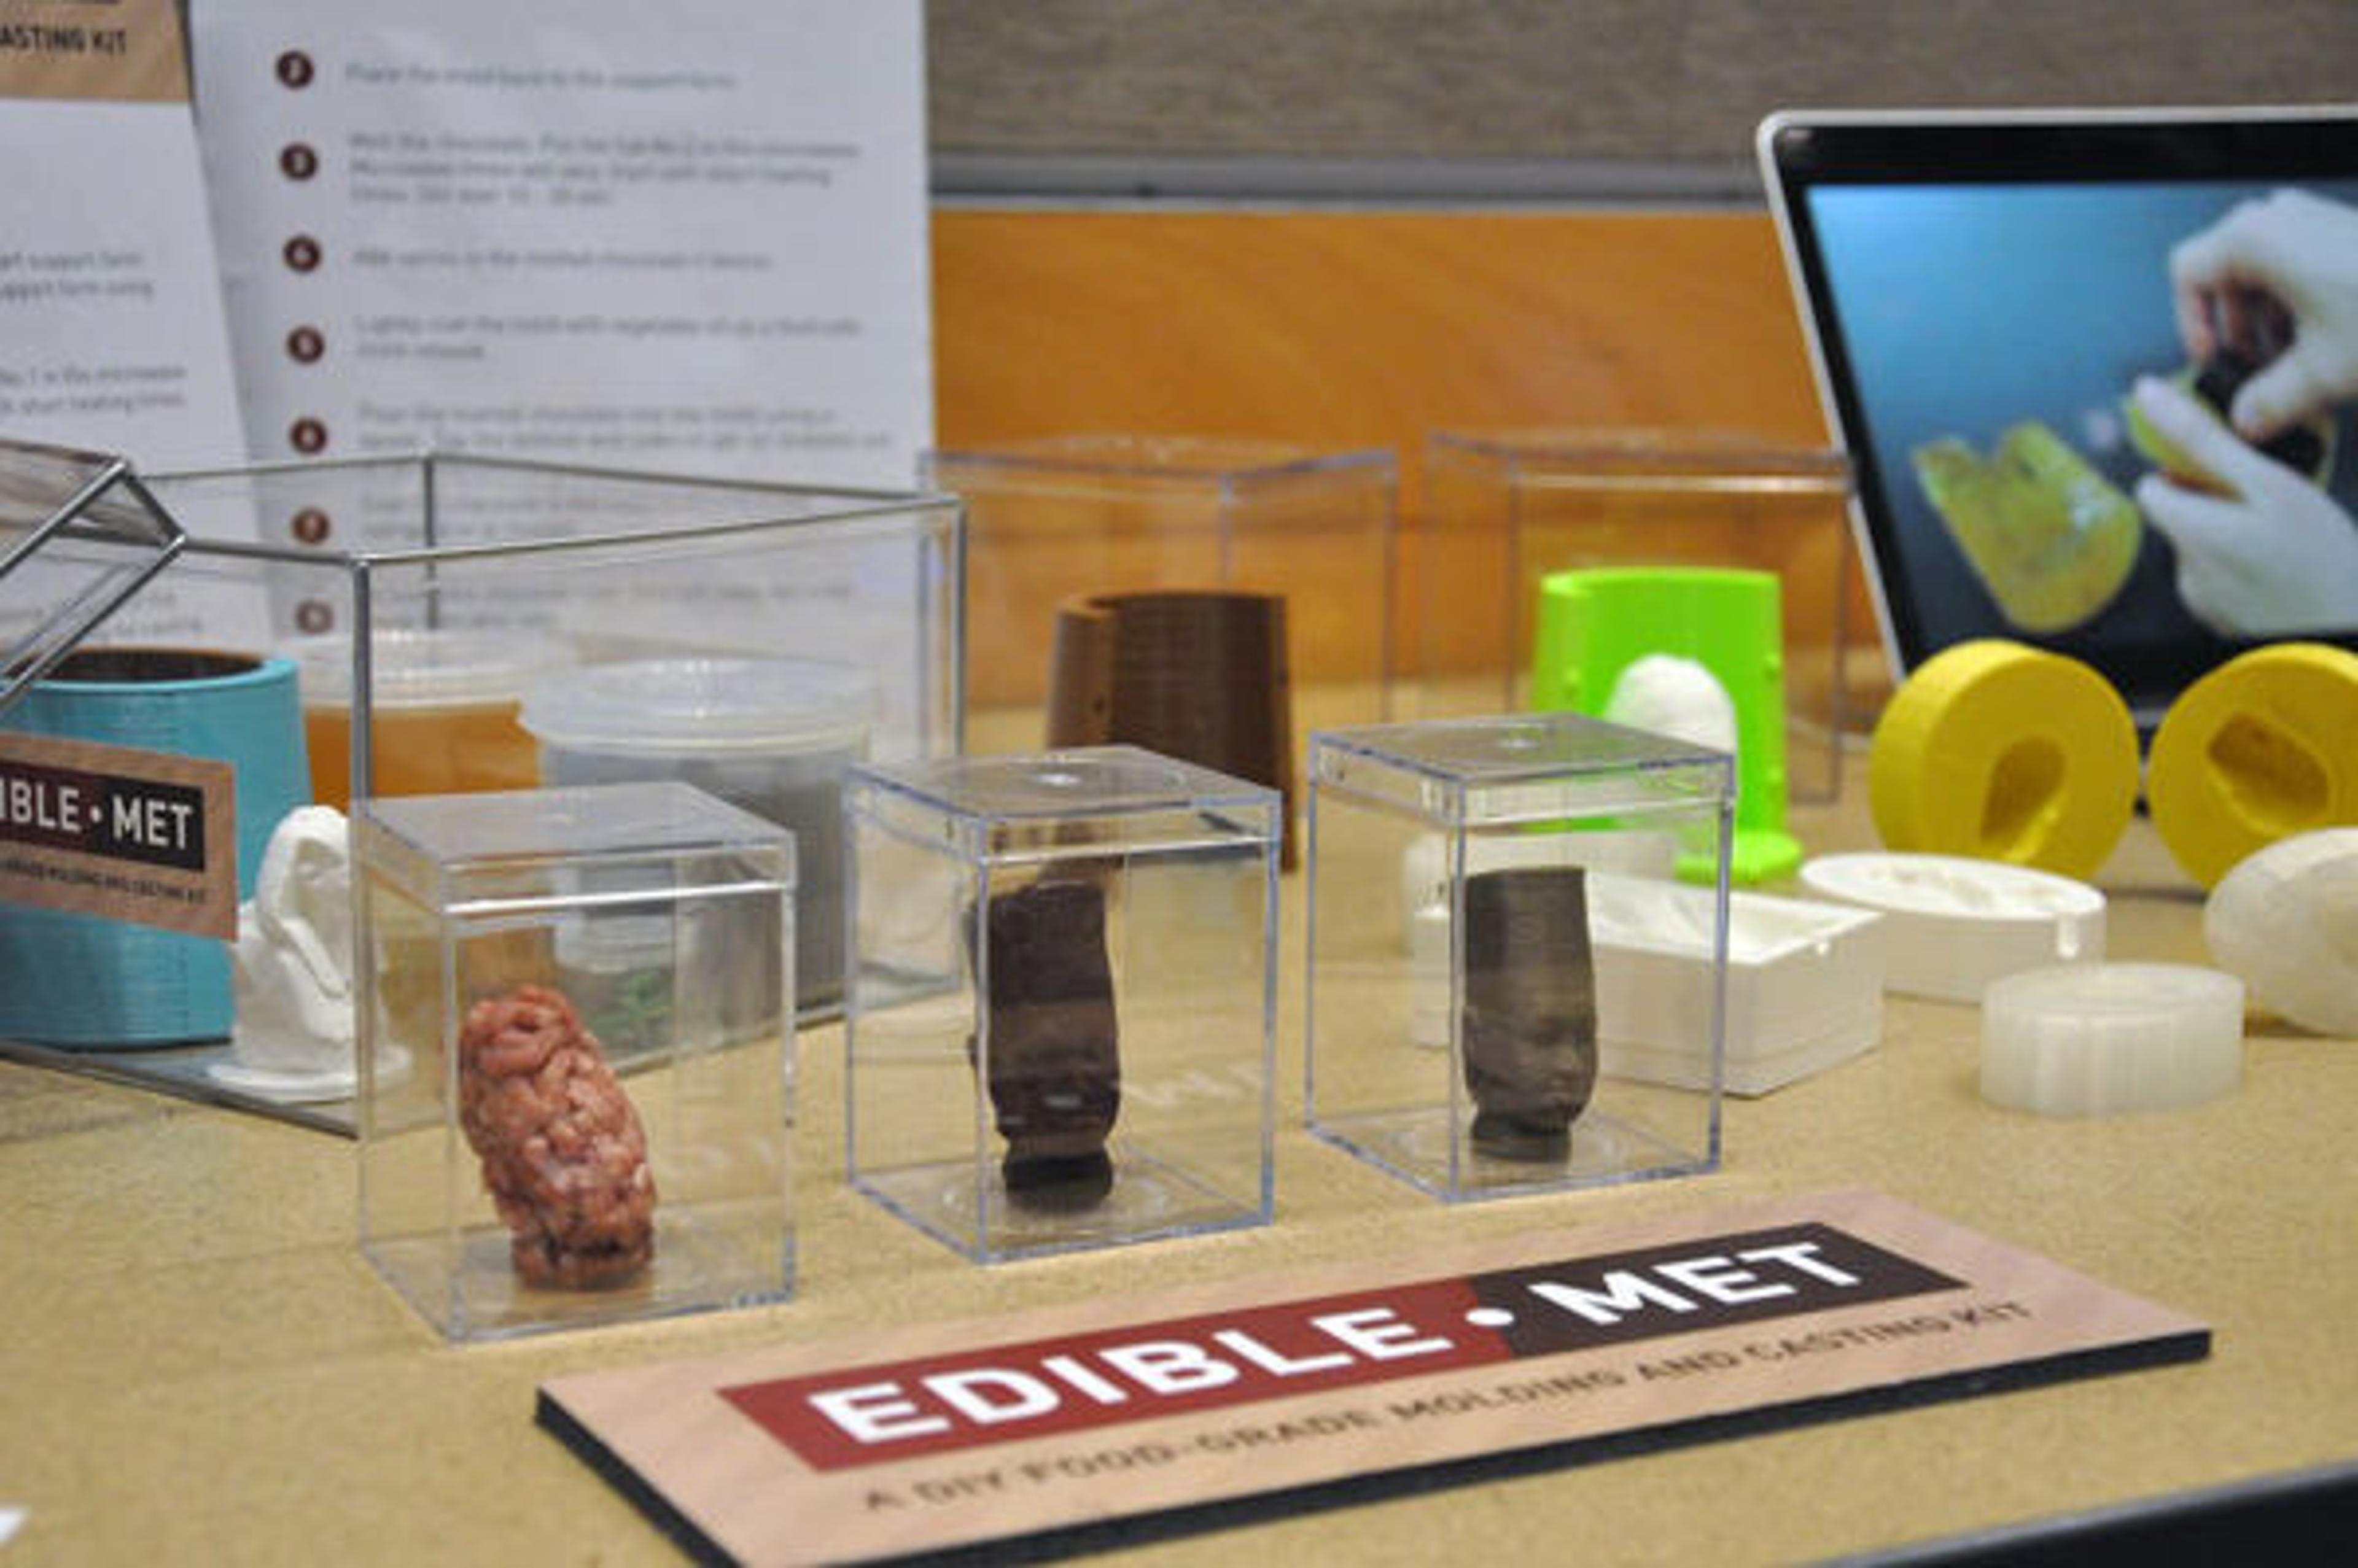 Three castings in a case on display for the fall MediaLab Expo 2014.